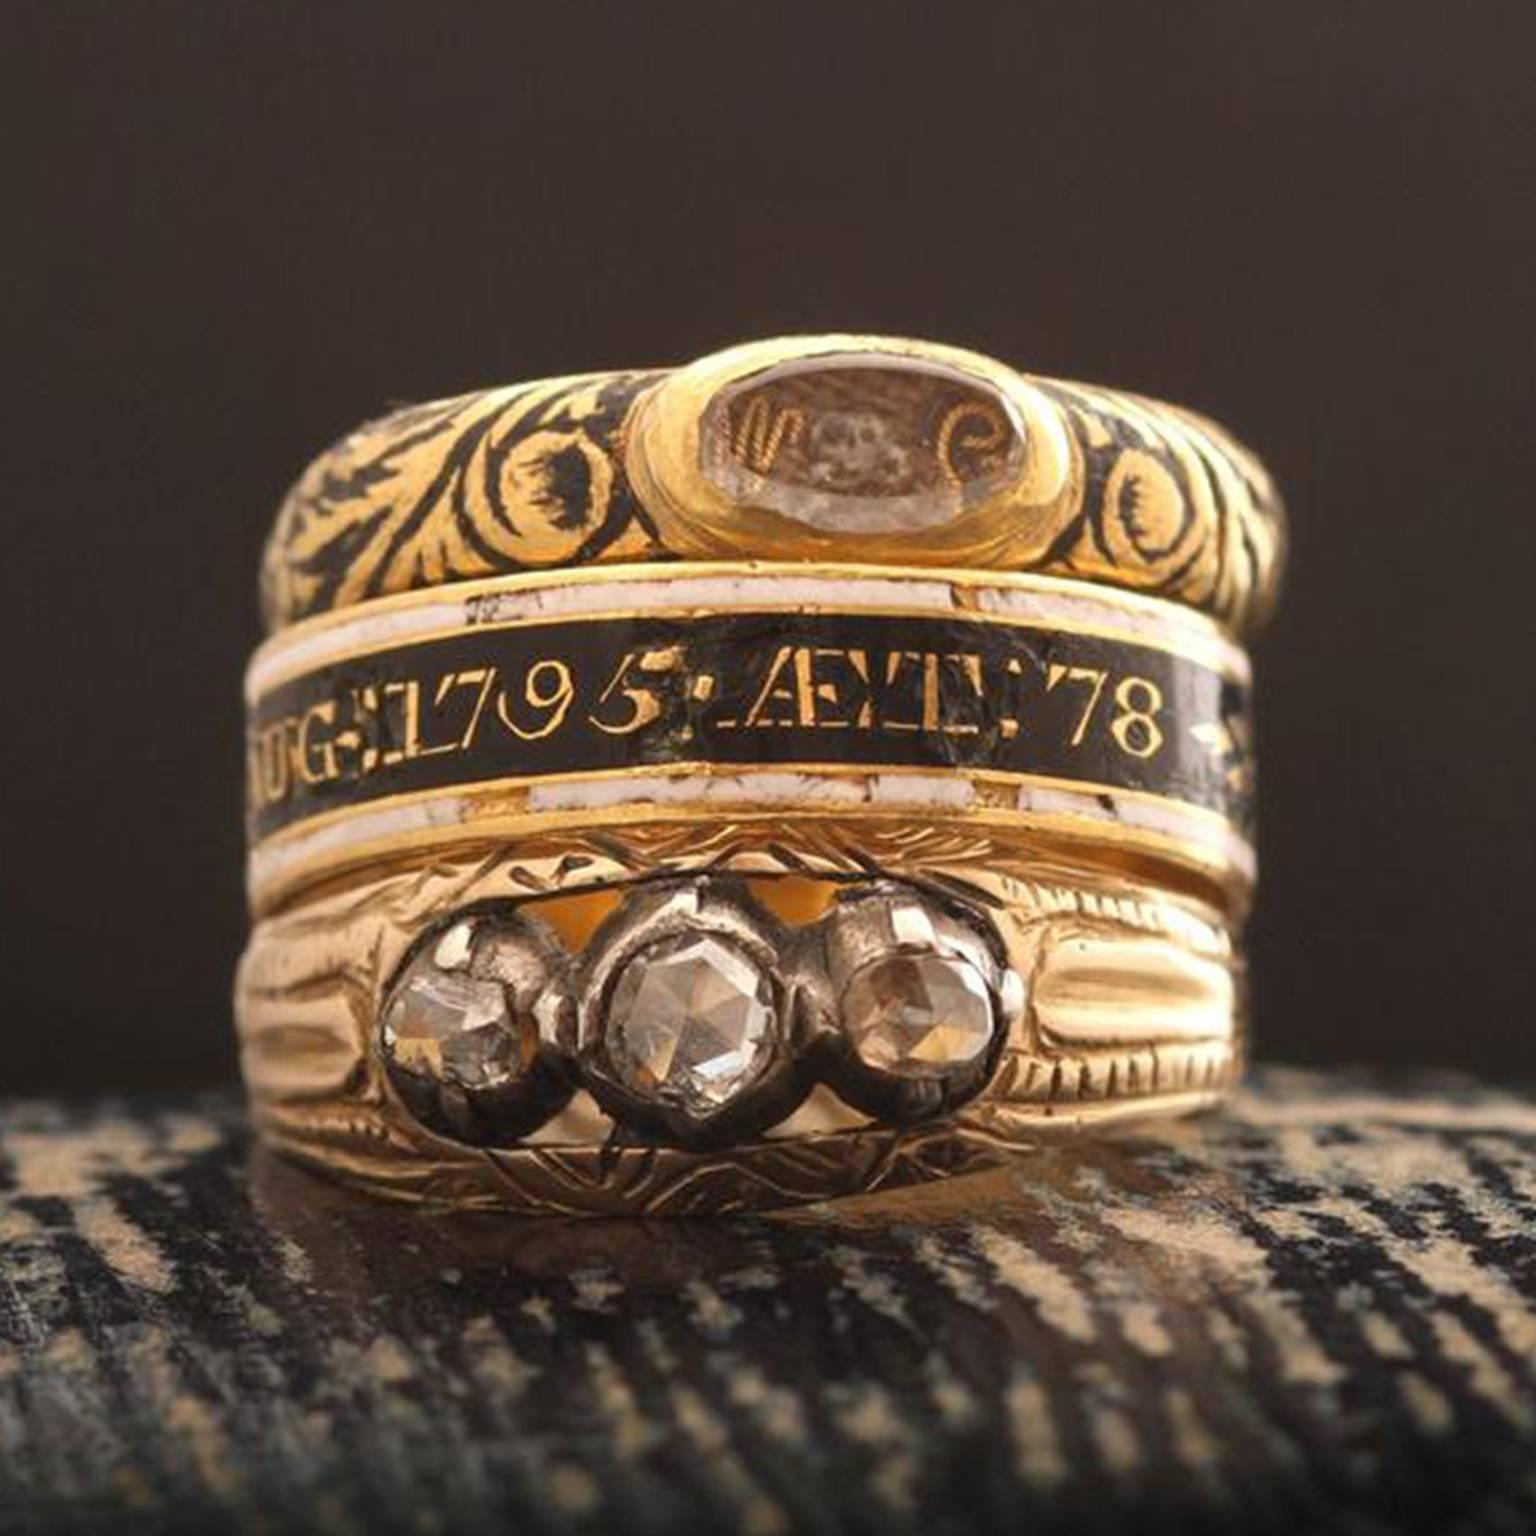 Women's or Men's Georgian Baroque Mourning Ring with Skull and Crossbones and Cipher